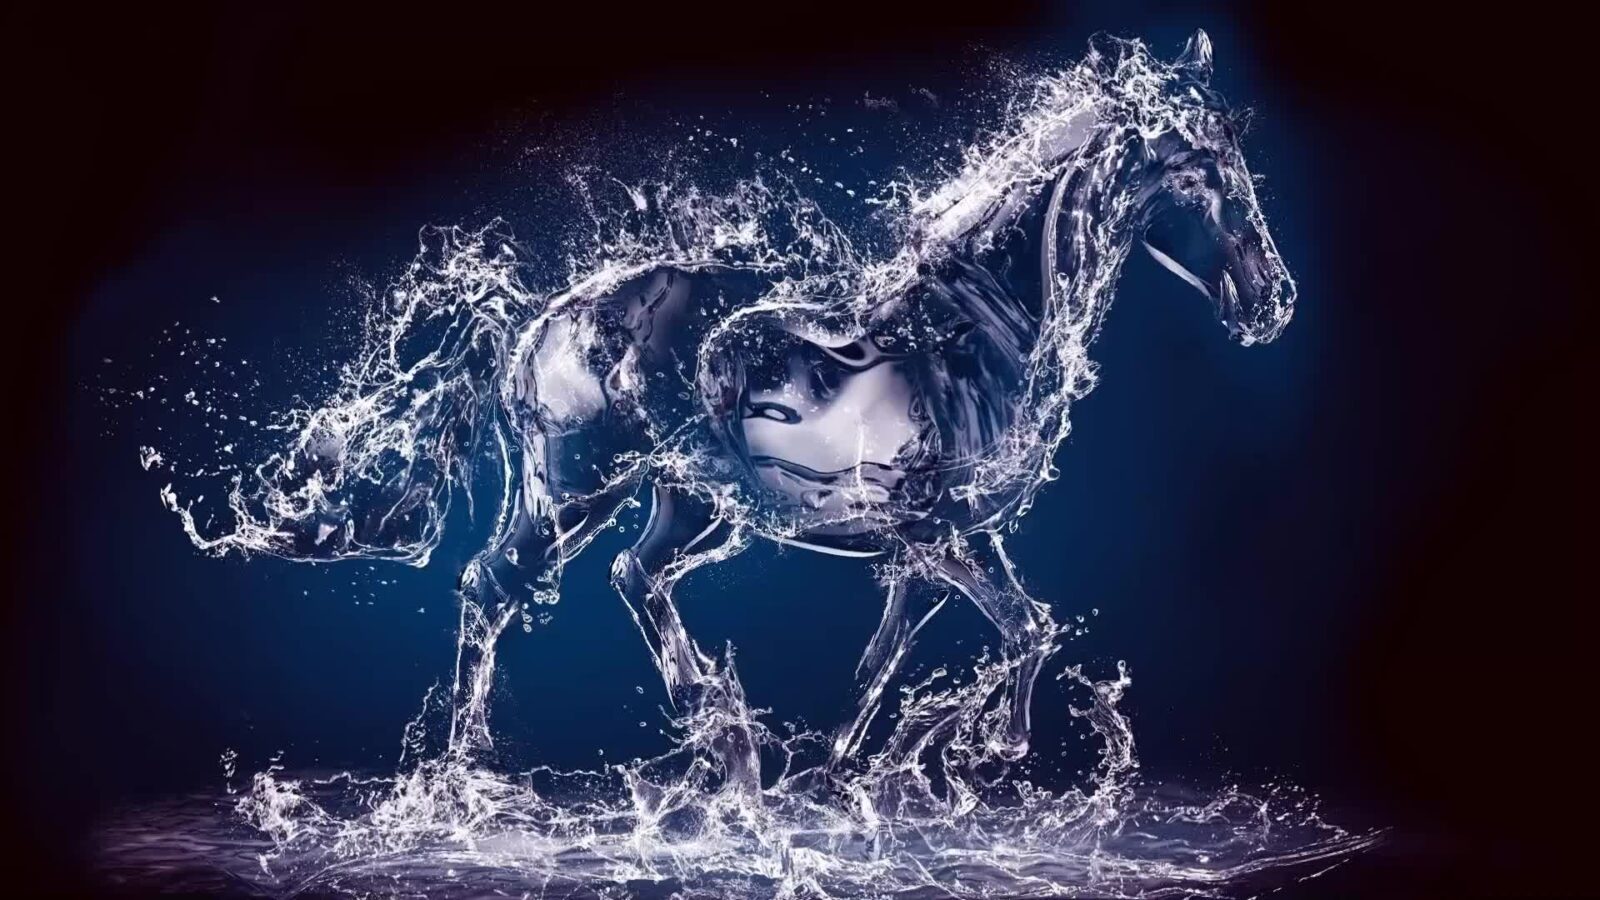 LiveWallpapers4Free.com | 3D Water Horse Liquid - Free Animated Wallpaper